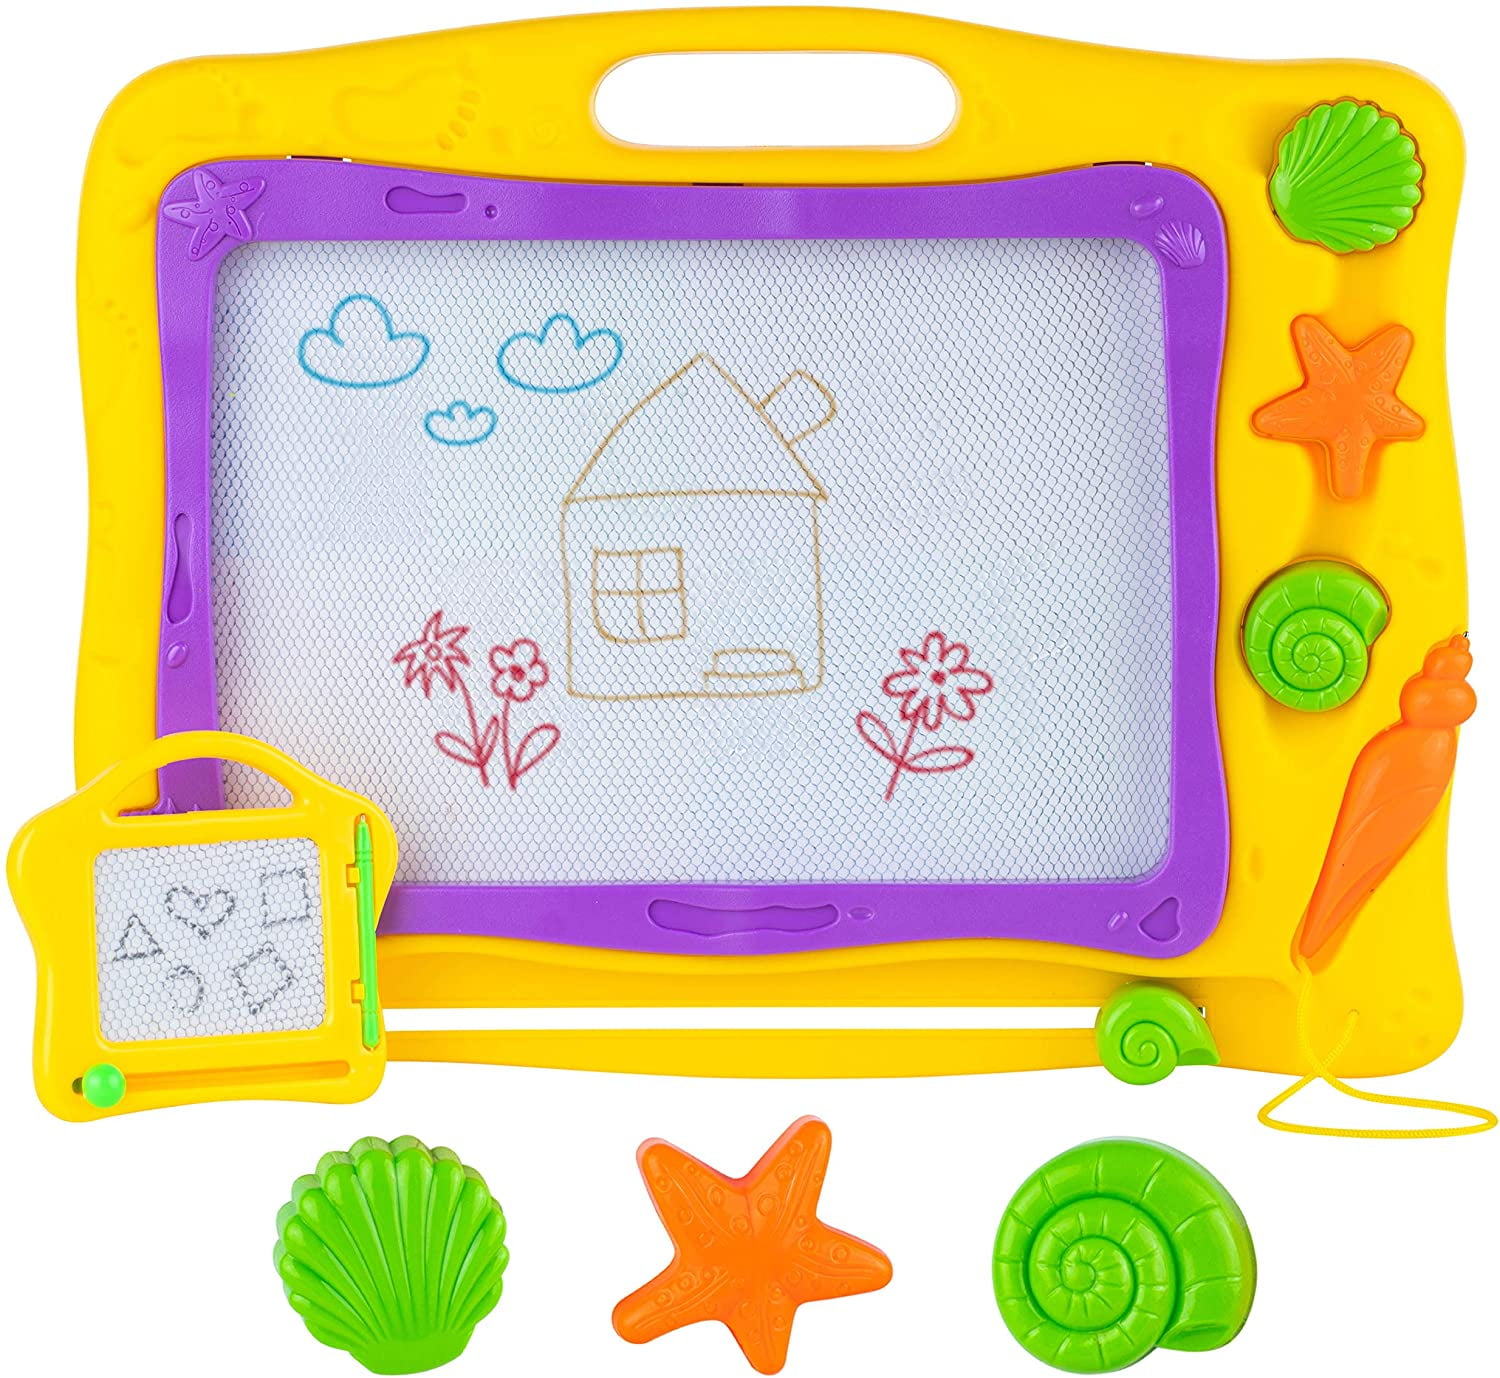 5 16 Inch Large Doodle Board with 5 Stamps Magnetic Drawing Board for Kids 4 Geekper Educational Writing Painting Pad Creative Toys Gifts for 3 6 Years Old Toddlers Girls Boys 